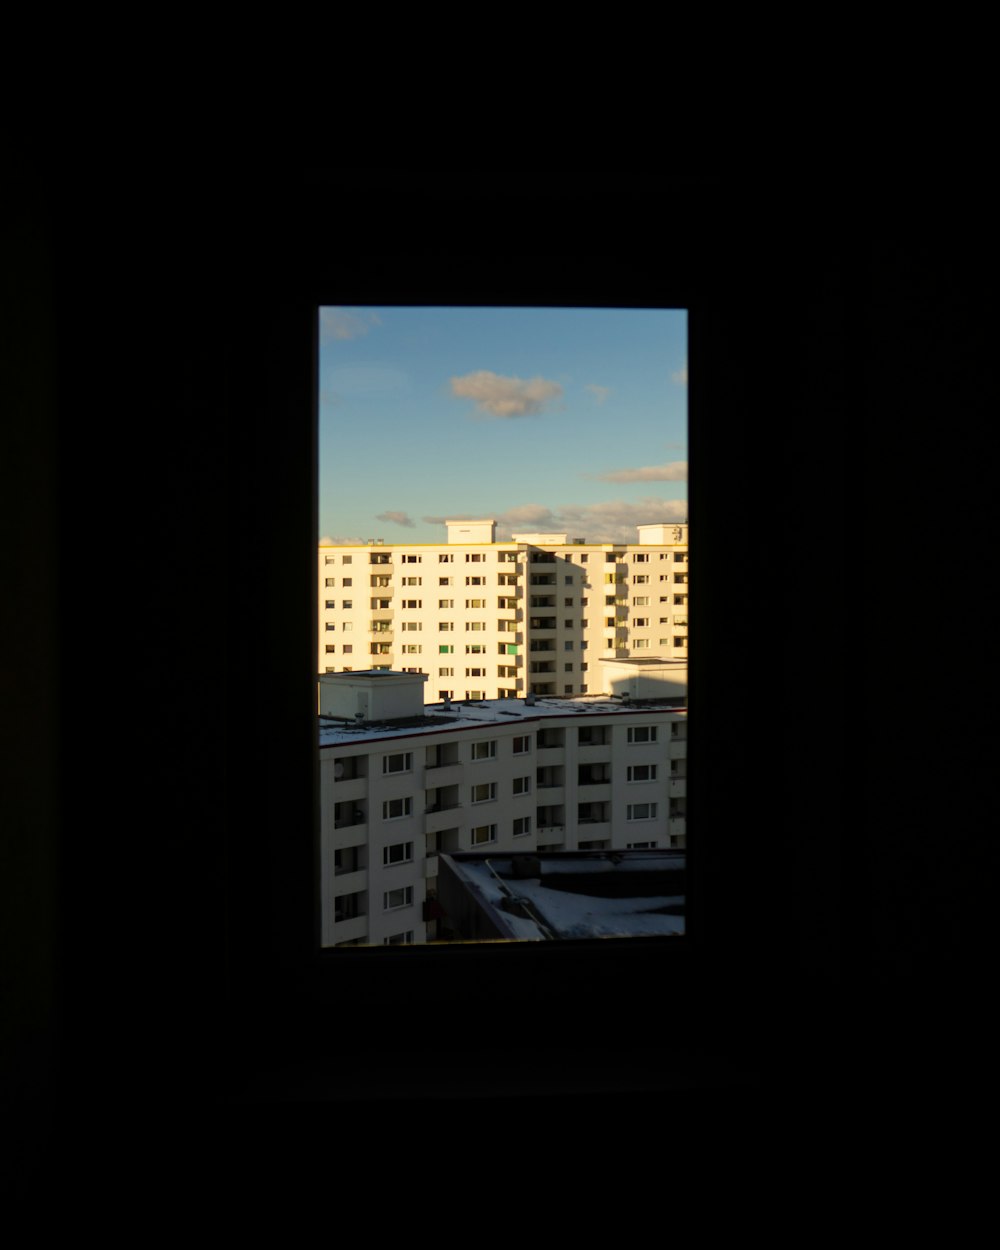 a view of a city from a window